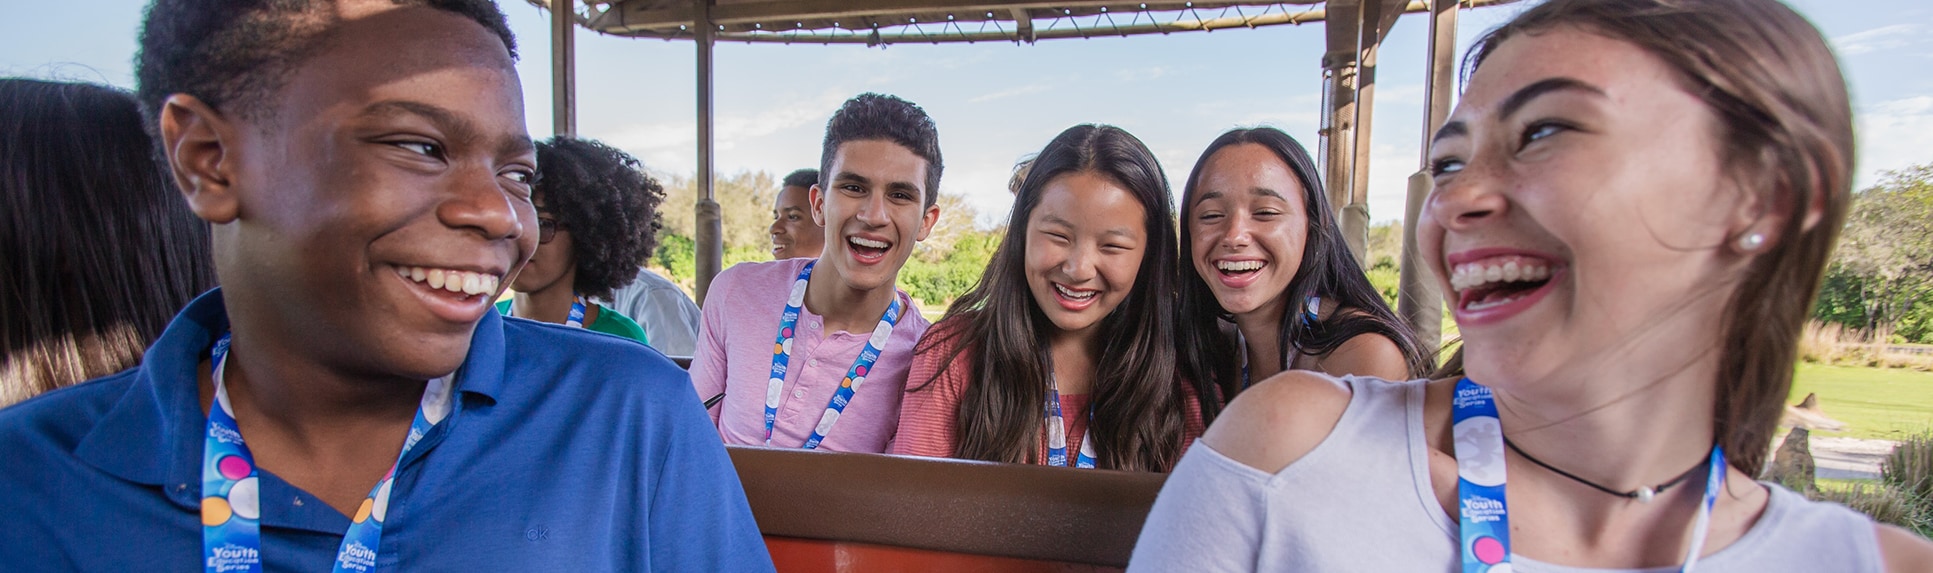 A group of teenagers in an open-air vehicle smiling at each other as they ride through a savanna